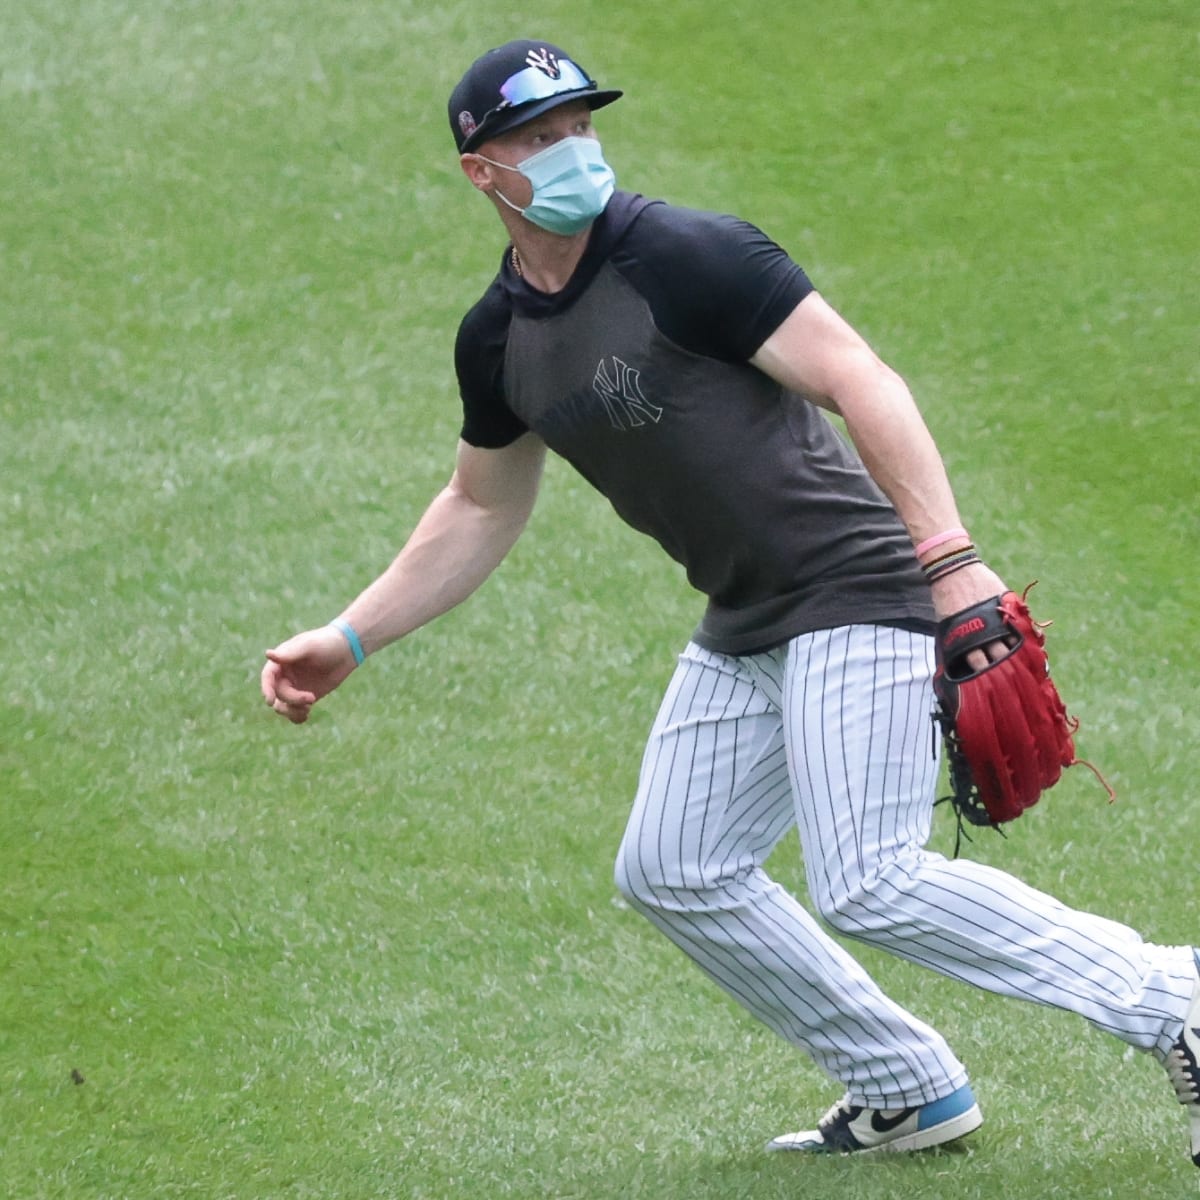 2020 MLB season: Some players open to wearing face masks during games -  Sports Illustrated